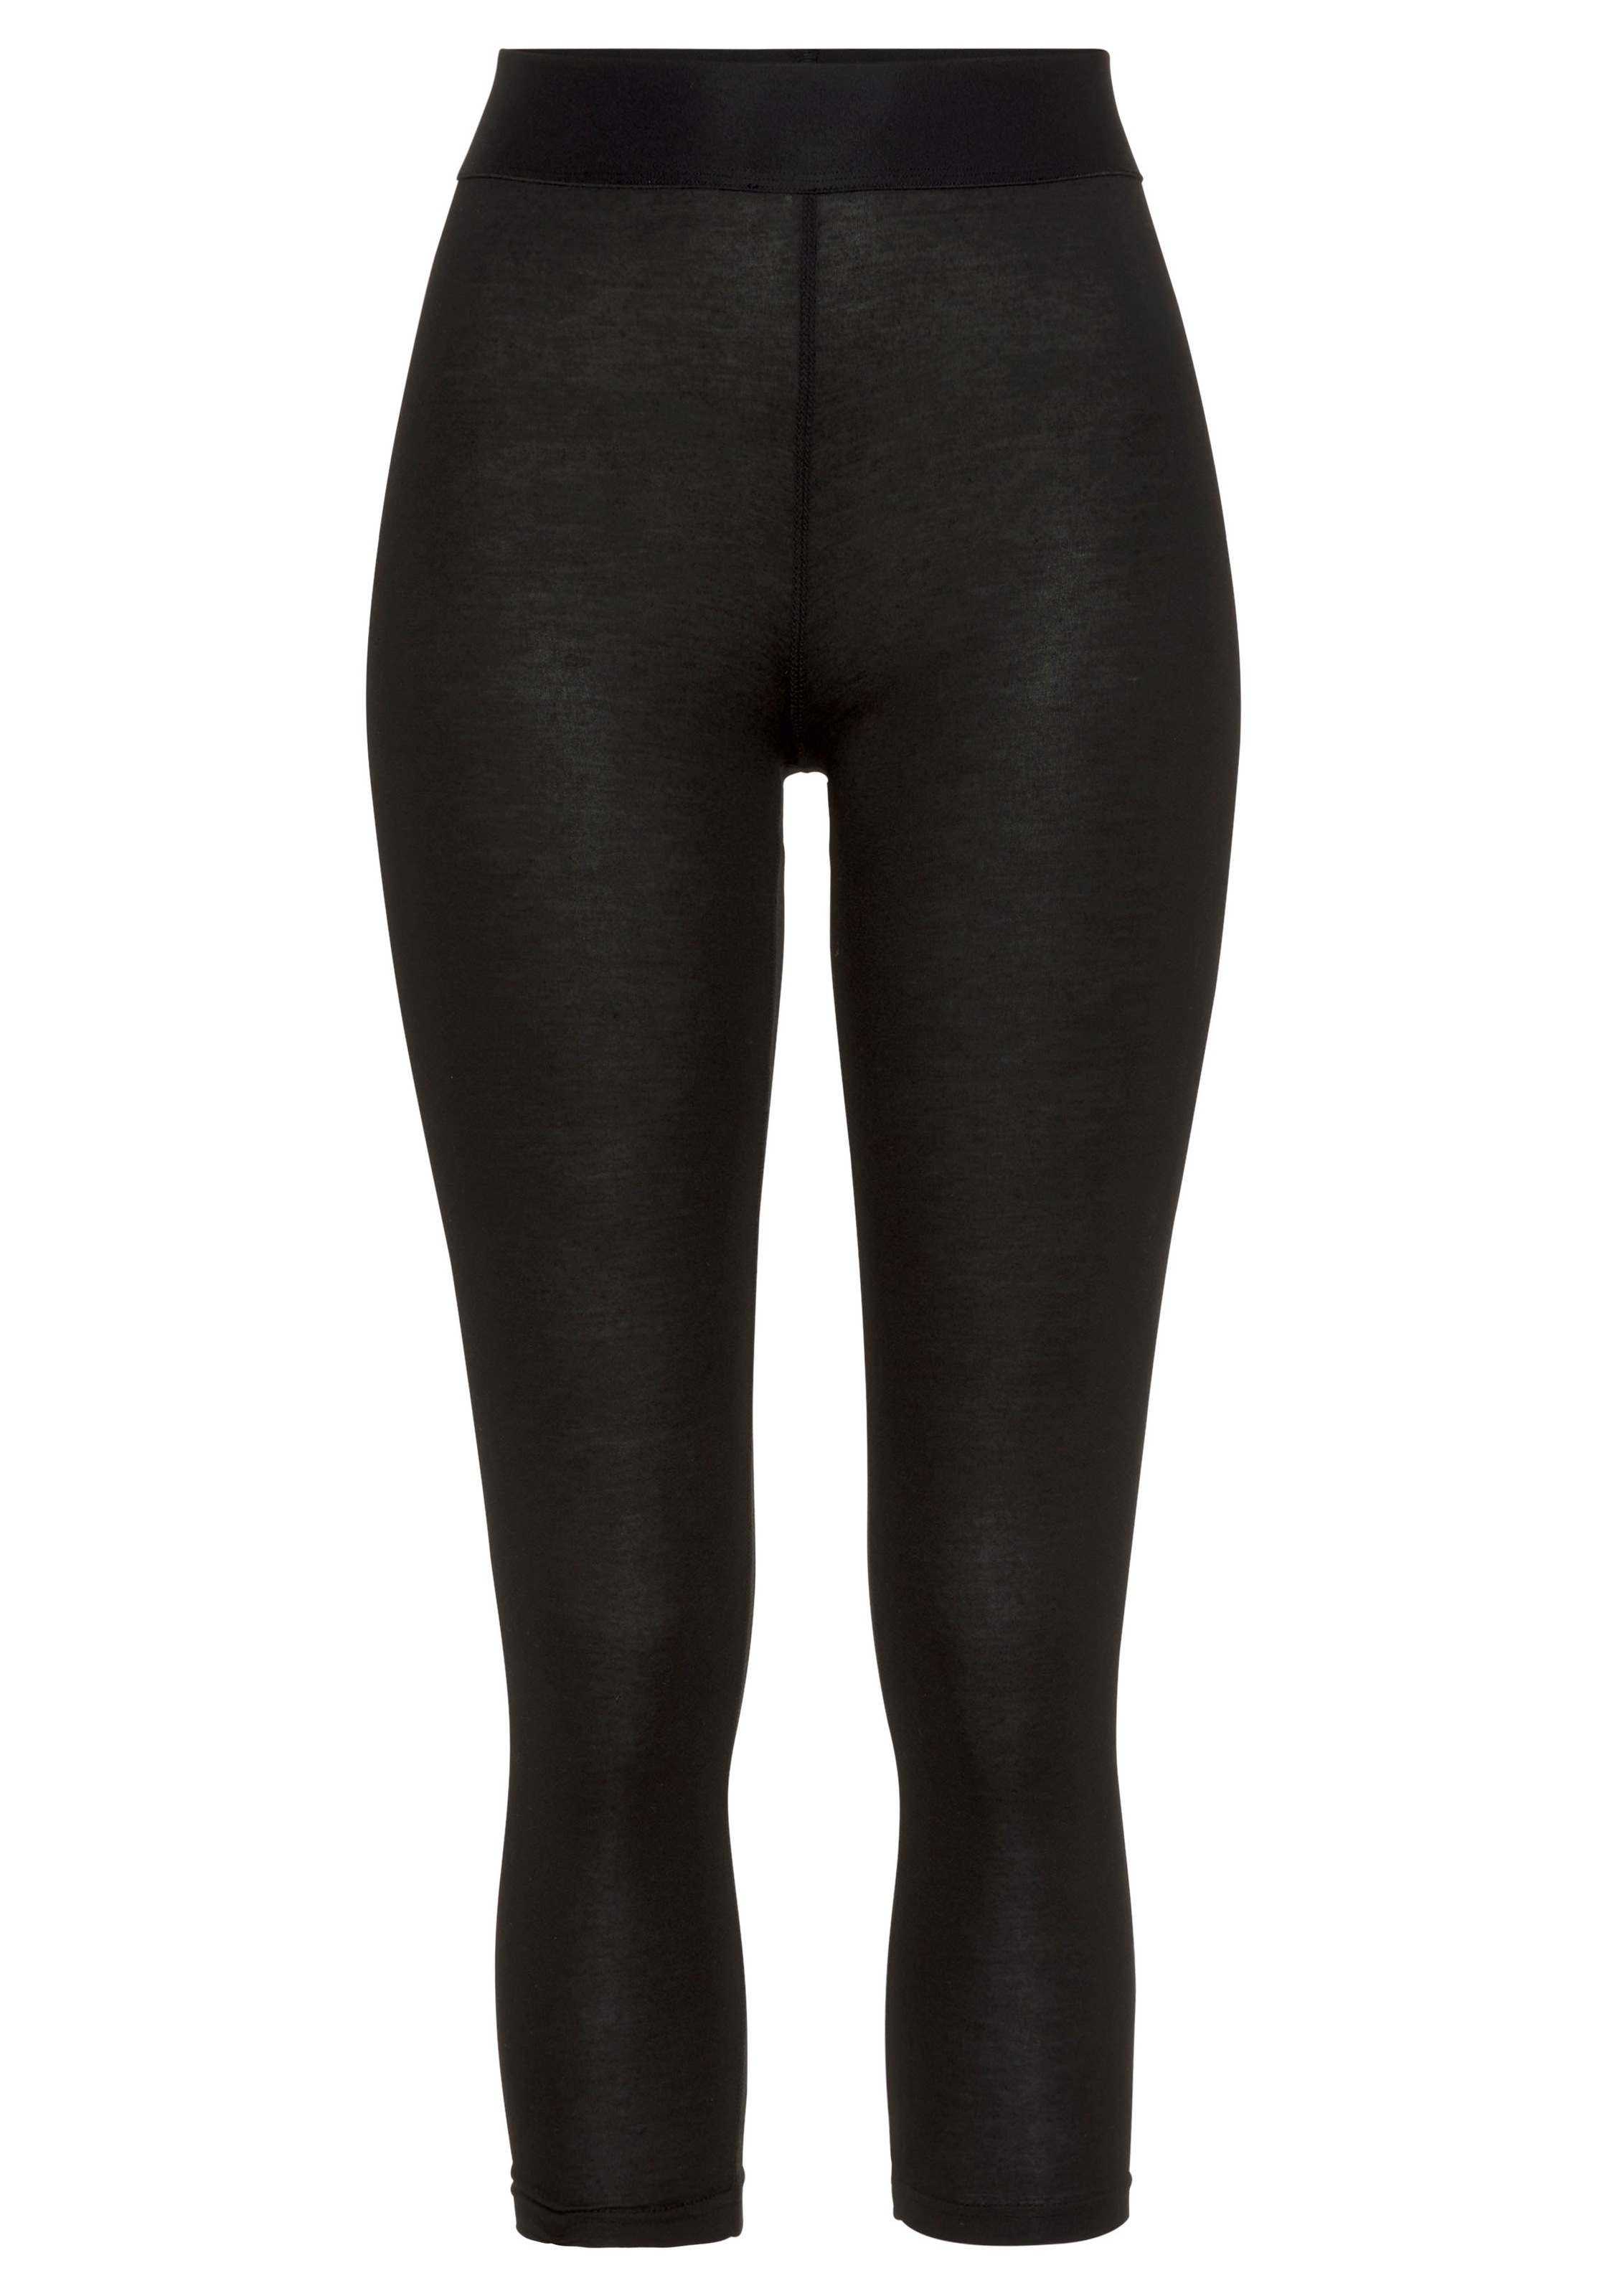 LASCANA ACTIVE Leggings, in angenehmer Wollqualität